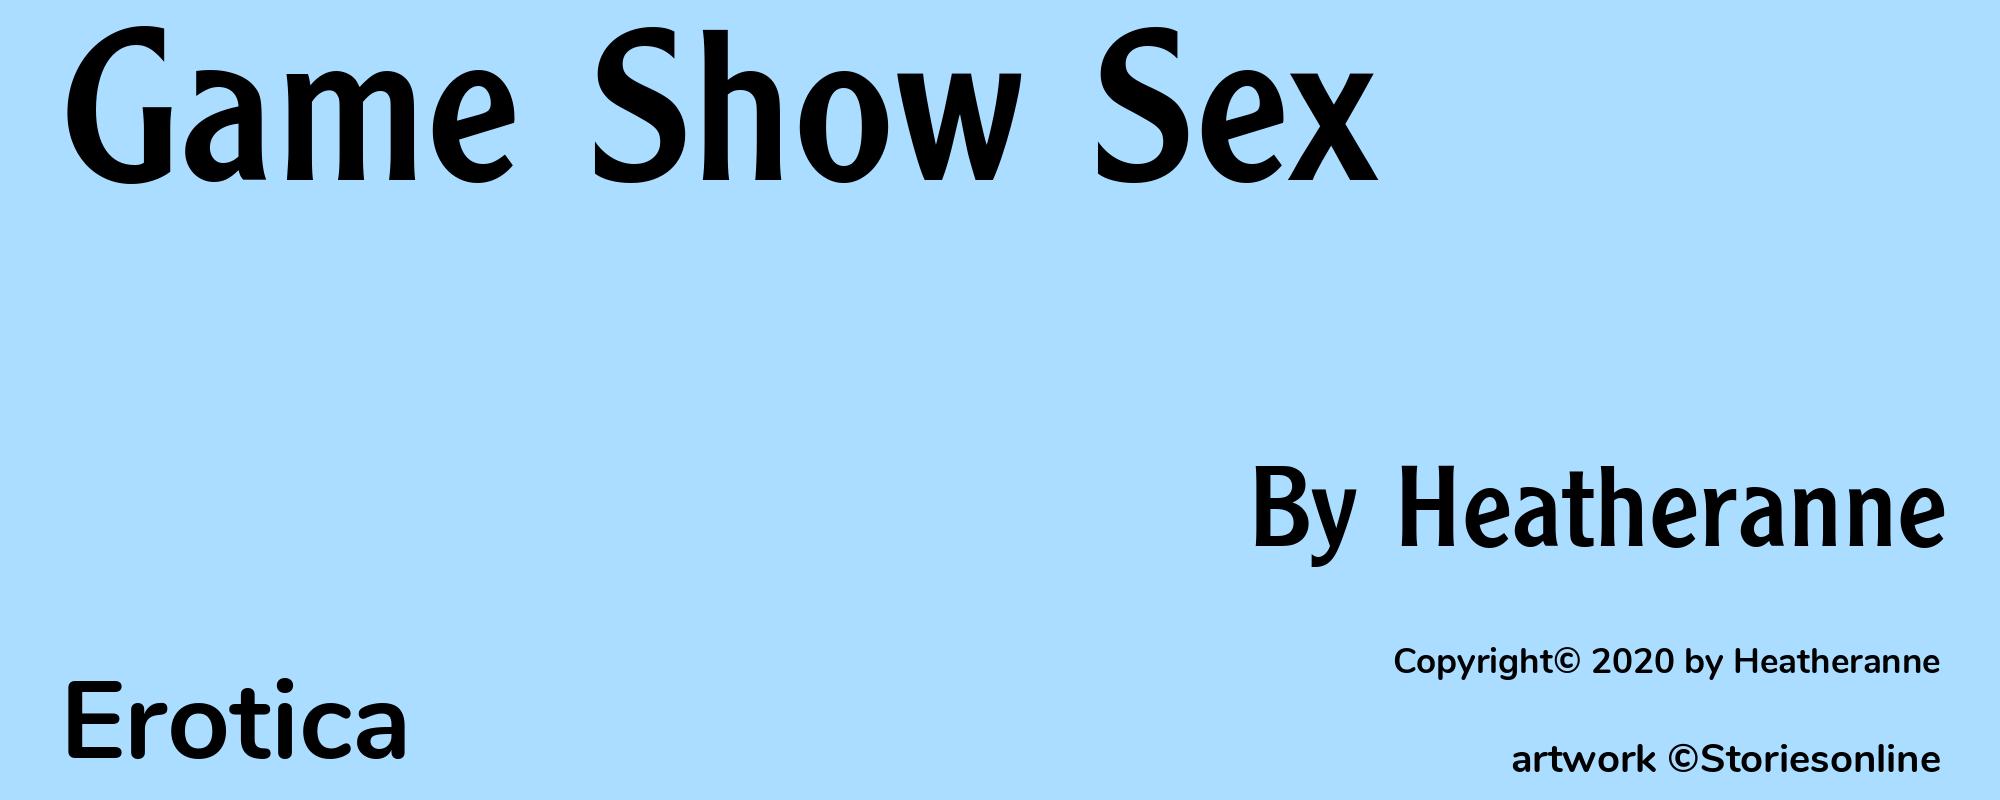 Game Show Sex - Cover